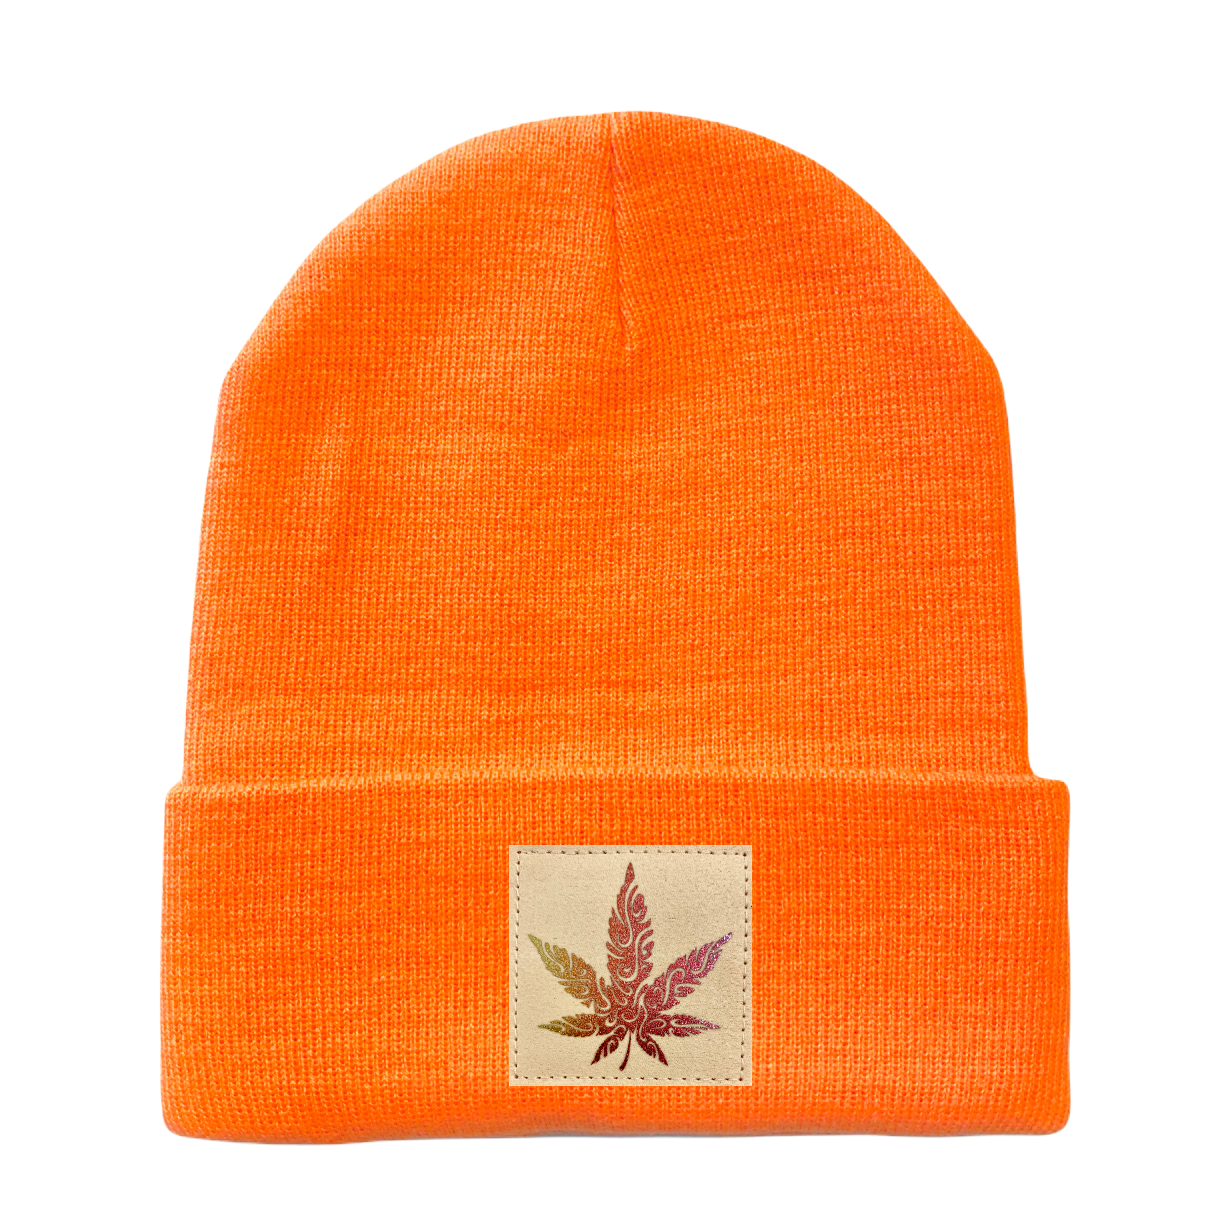 Neon Safety Orange Cuffed Beanie with Hand Made Vegan Leather Holographic Mushroom Patch over your Third eye, plant medicine hat by Buddha Gear 